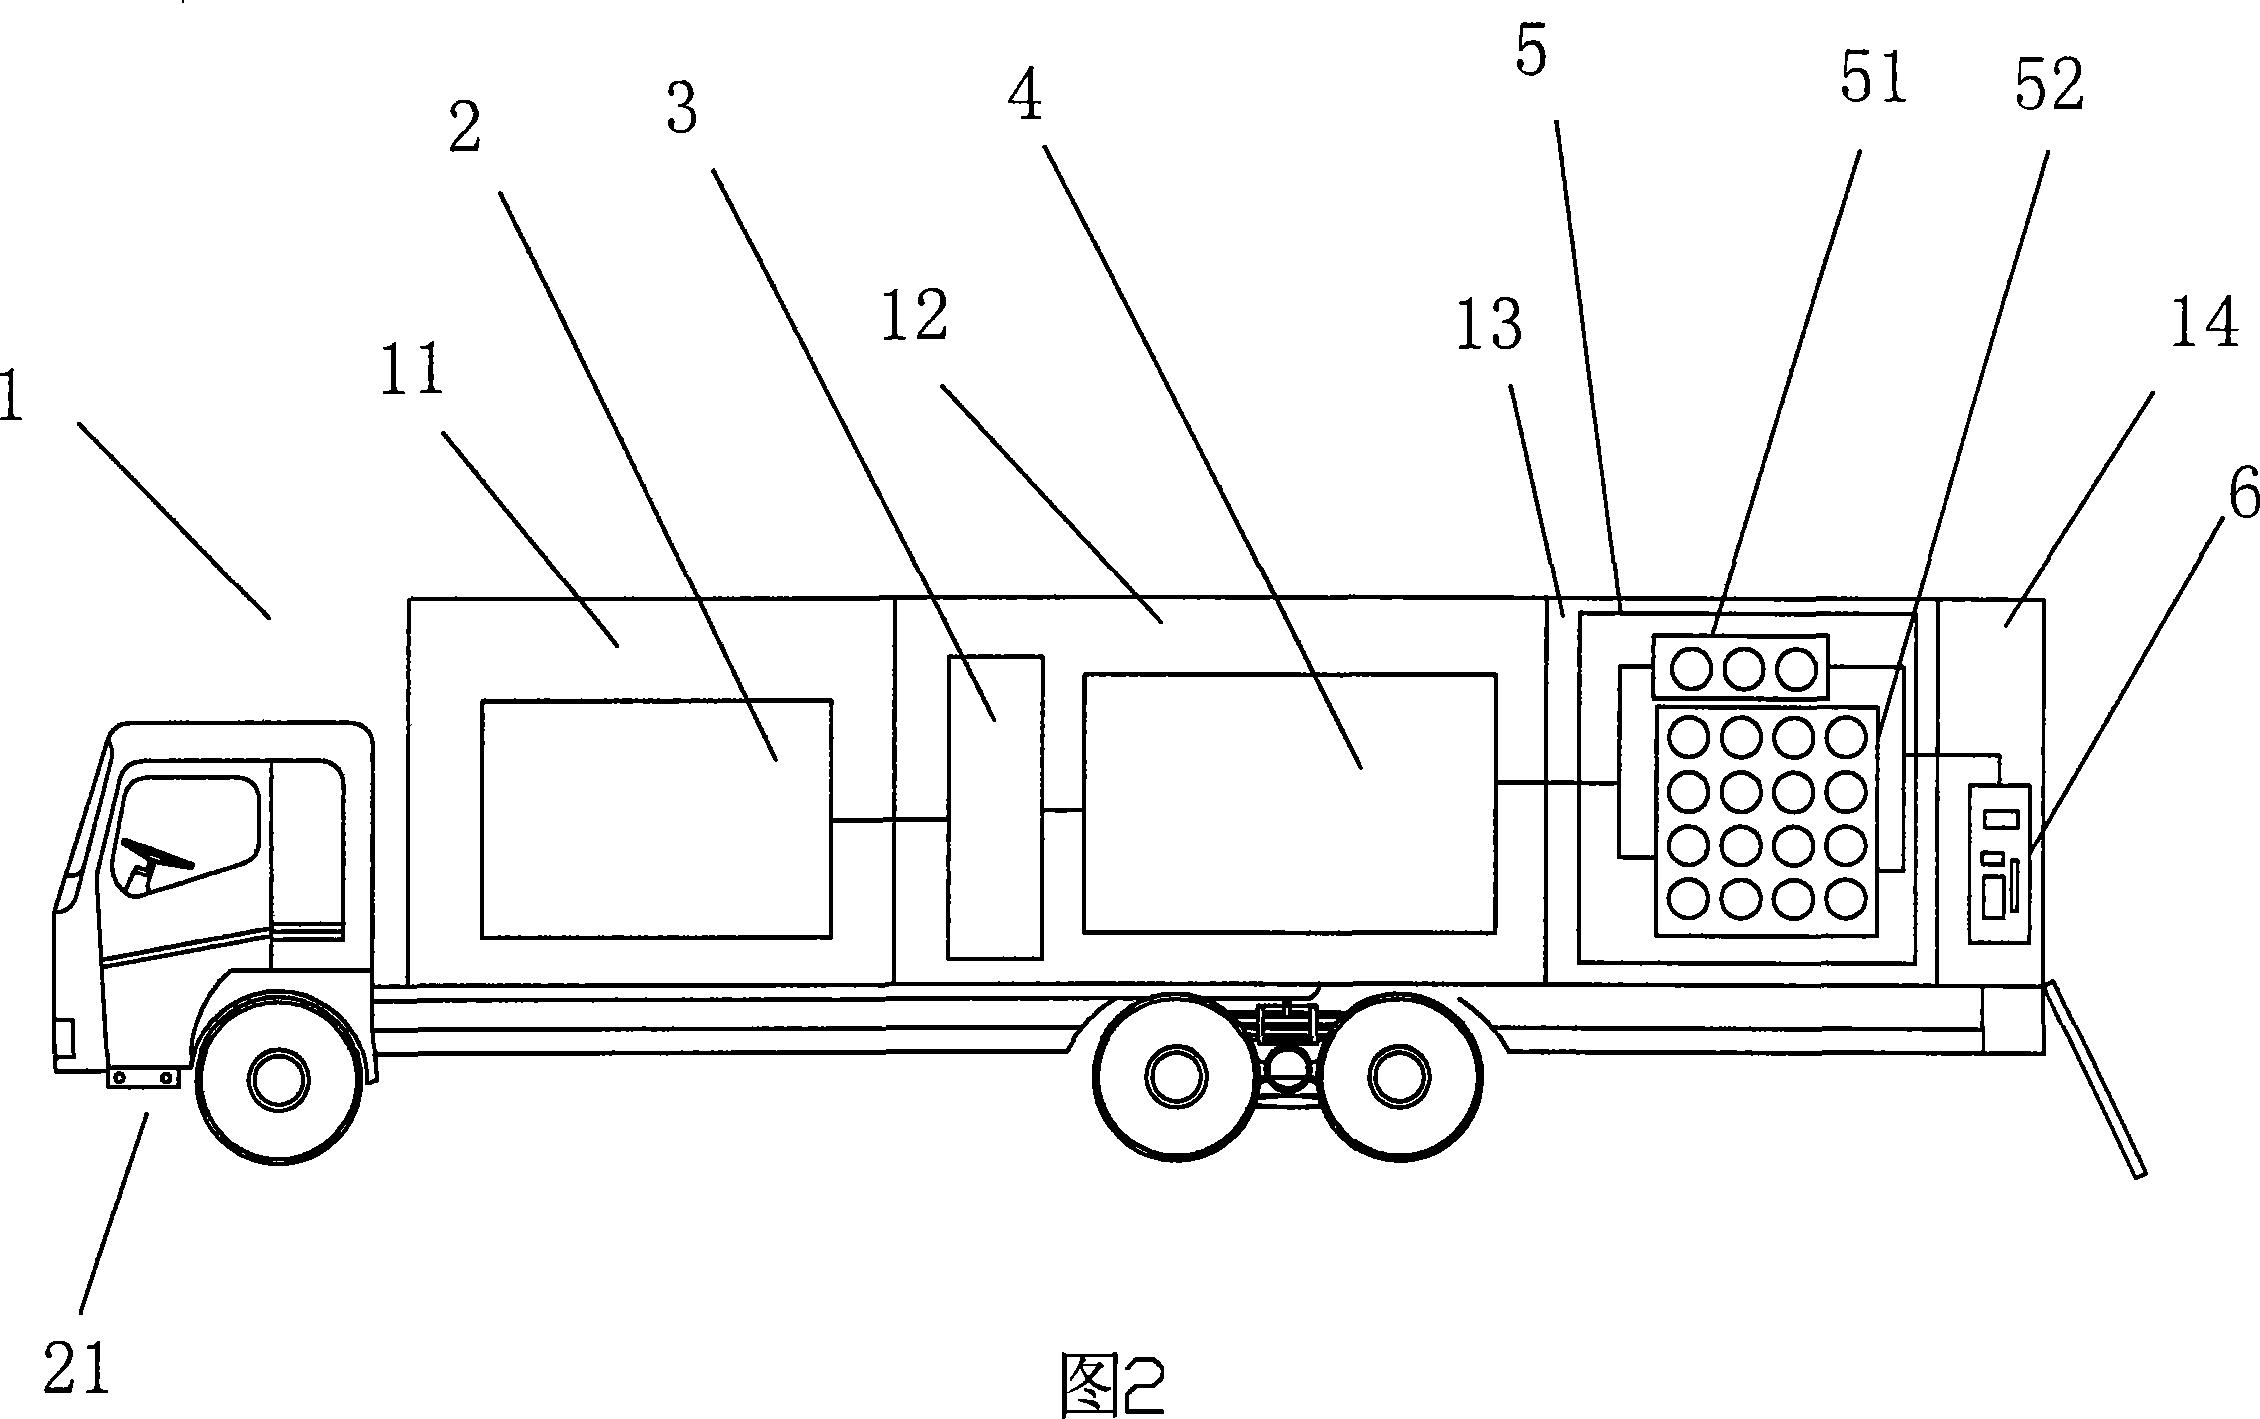 Vehicle mounted hydrogen producing hydrogenation station